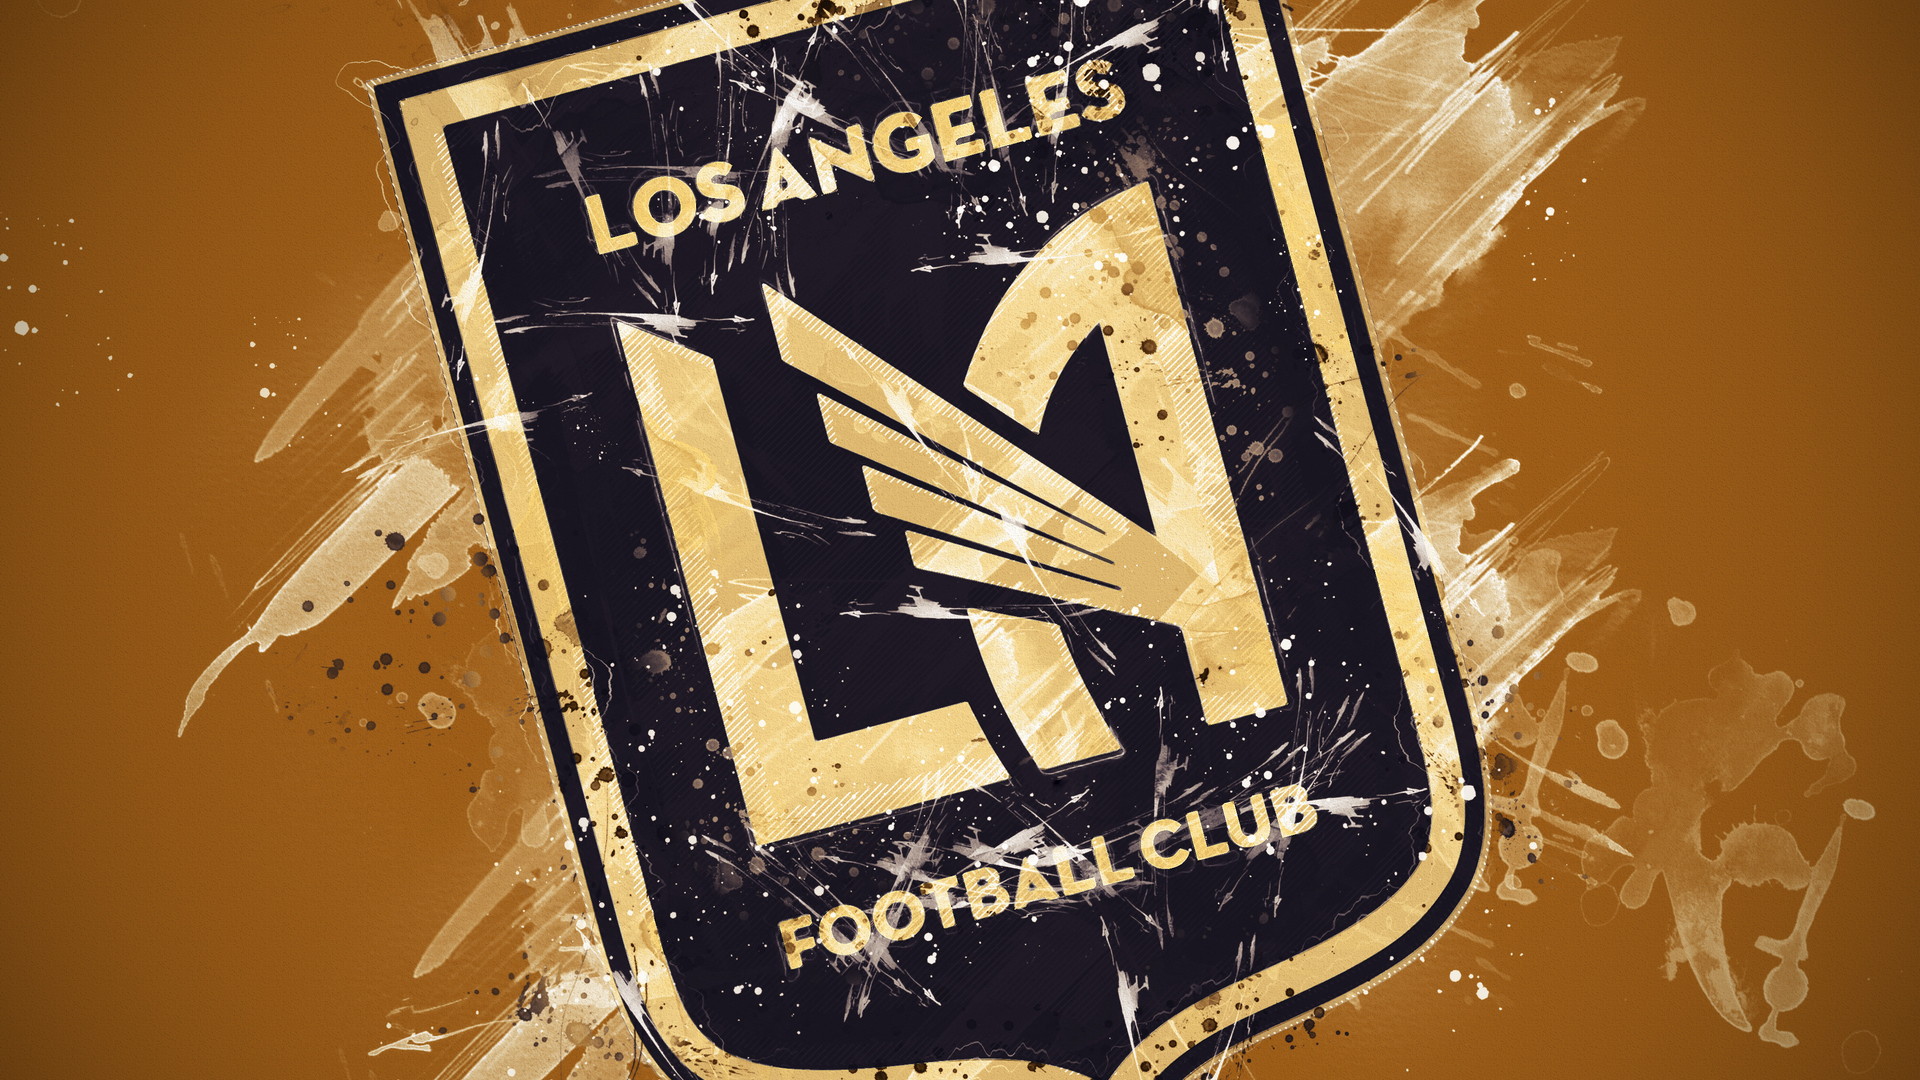 Best Los Angeles FC Desktop Wallpapers With high-resolution 1920X1080 pixel. You can use this wallpaper for your Desktop Computers, Mac Screensavers, Windows Backgrounds, iPhone Wallpapers, Tablet or Android Lock screen and another Mobile device